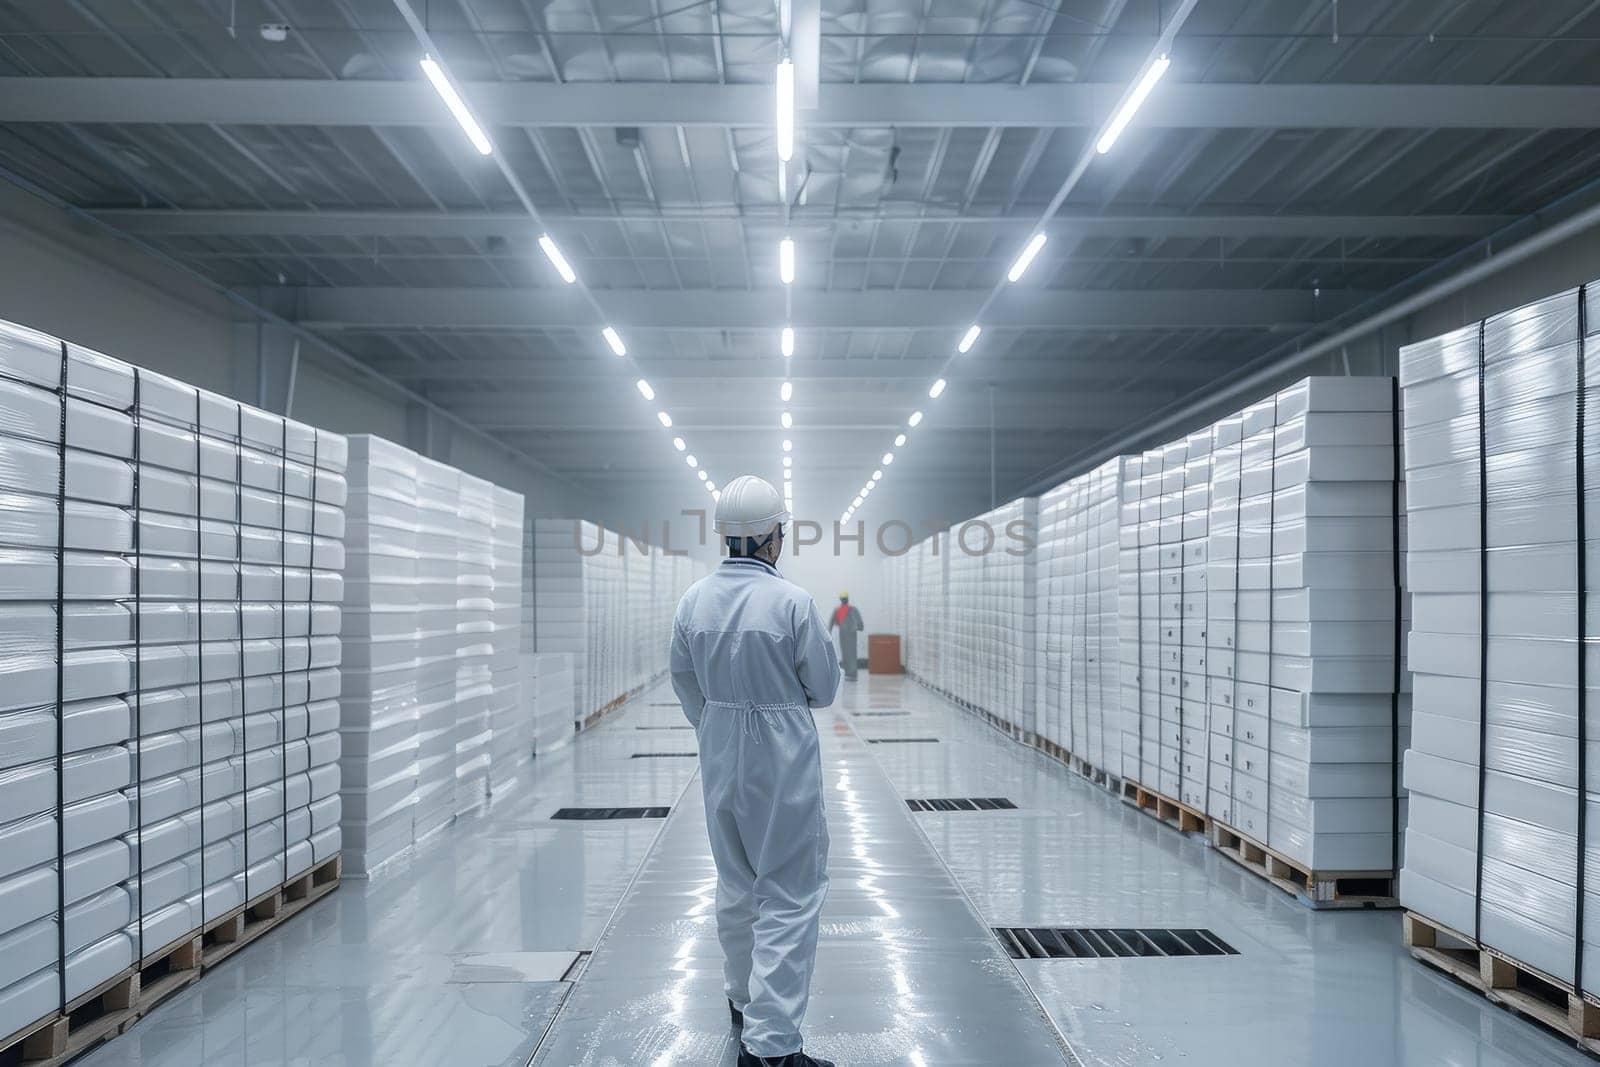 A man in a white suit stands in a large warehouse filled with boxes. The warehouse is dimly lit, and the man is looking at something on the ground. Scene is somewhat somber